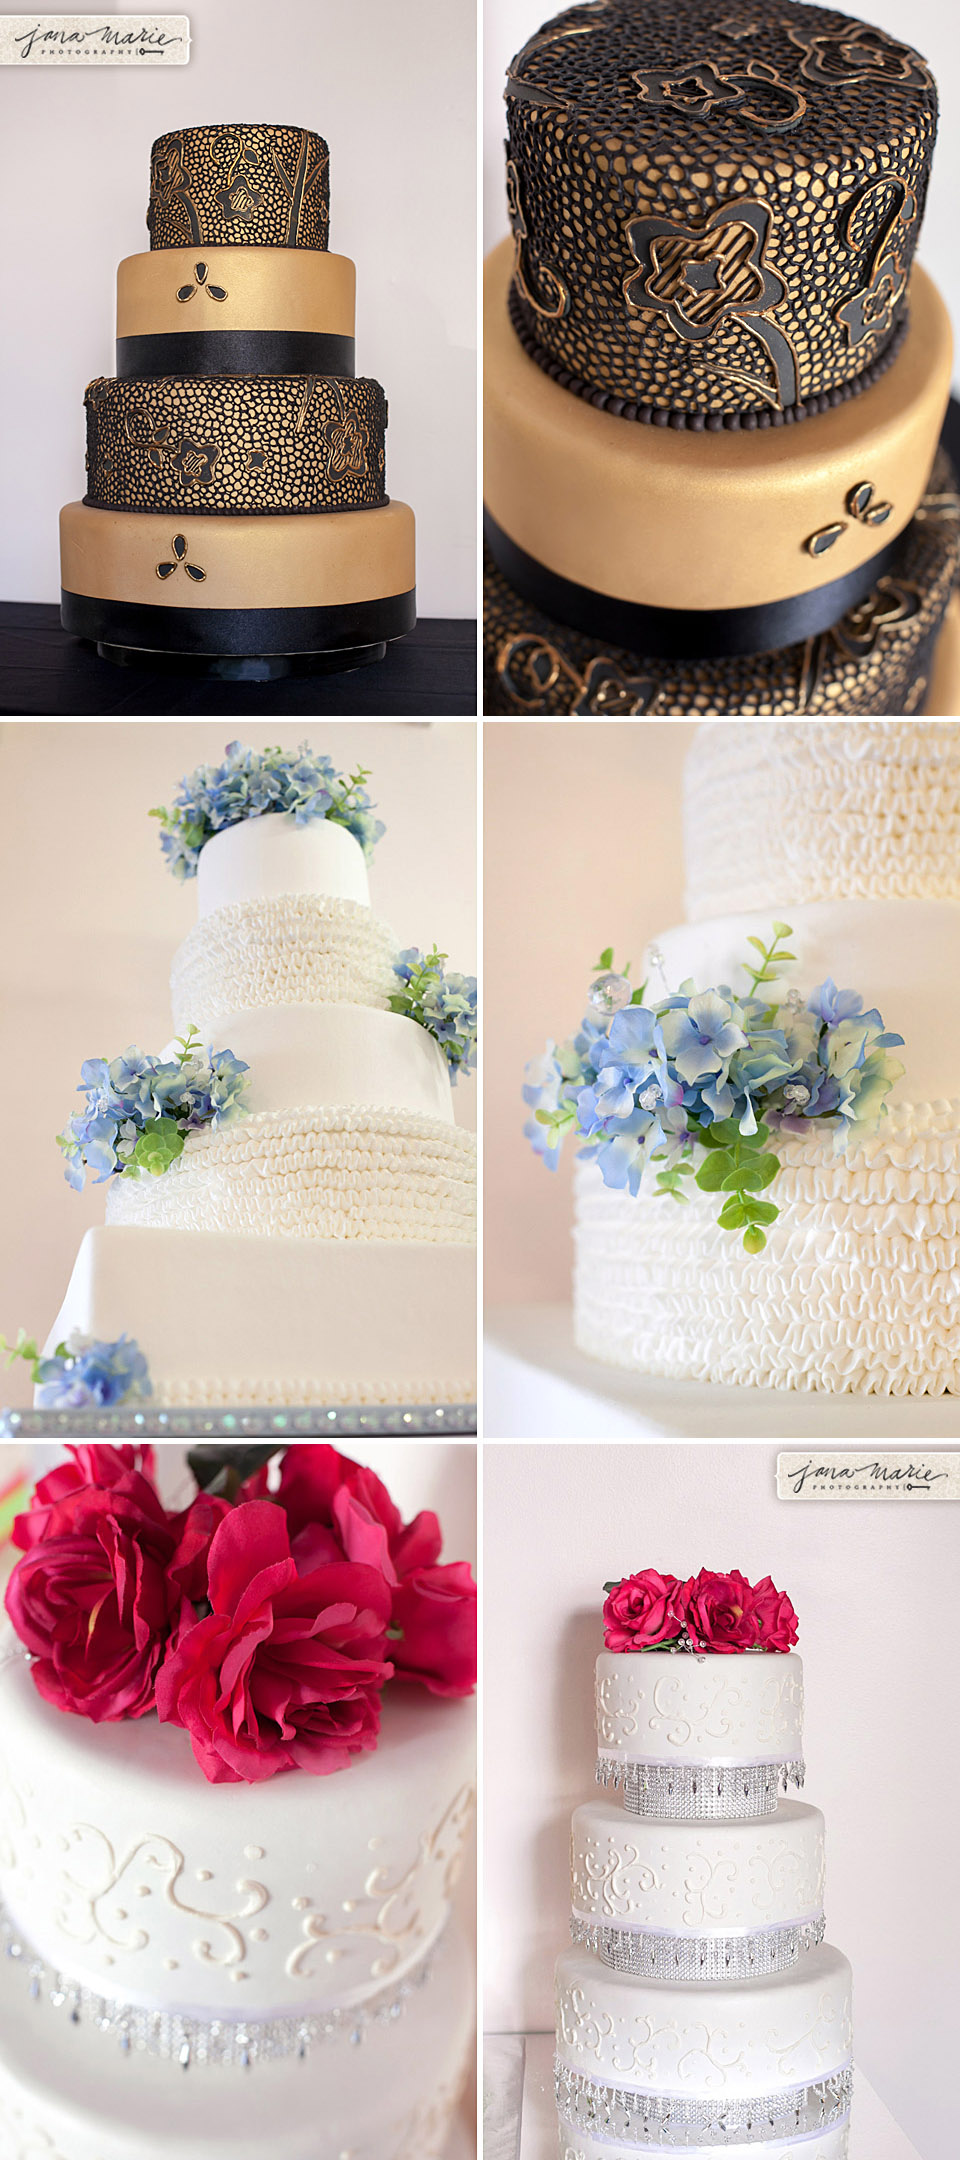 Blue flowers, tall cakes, expensive cake, Jana Marie Photos, Roses, lace cake, unique reception, cutting of cake, bride and groom